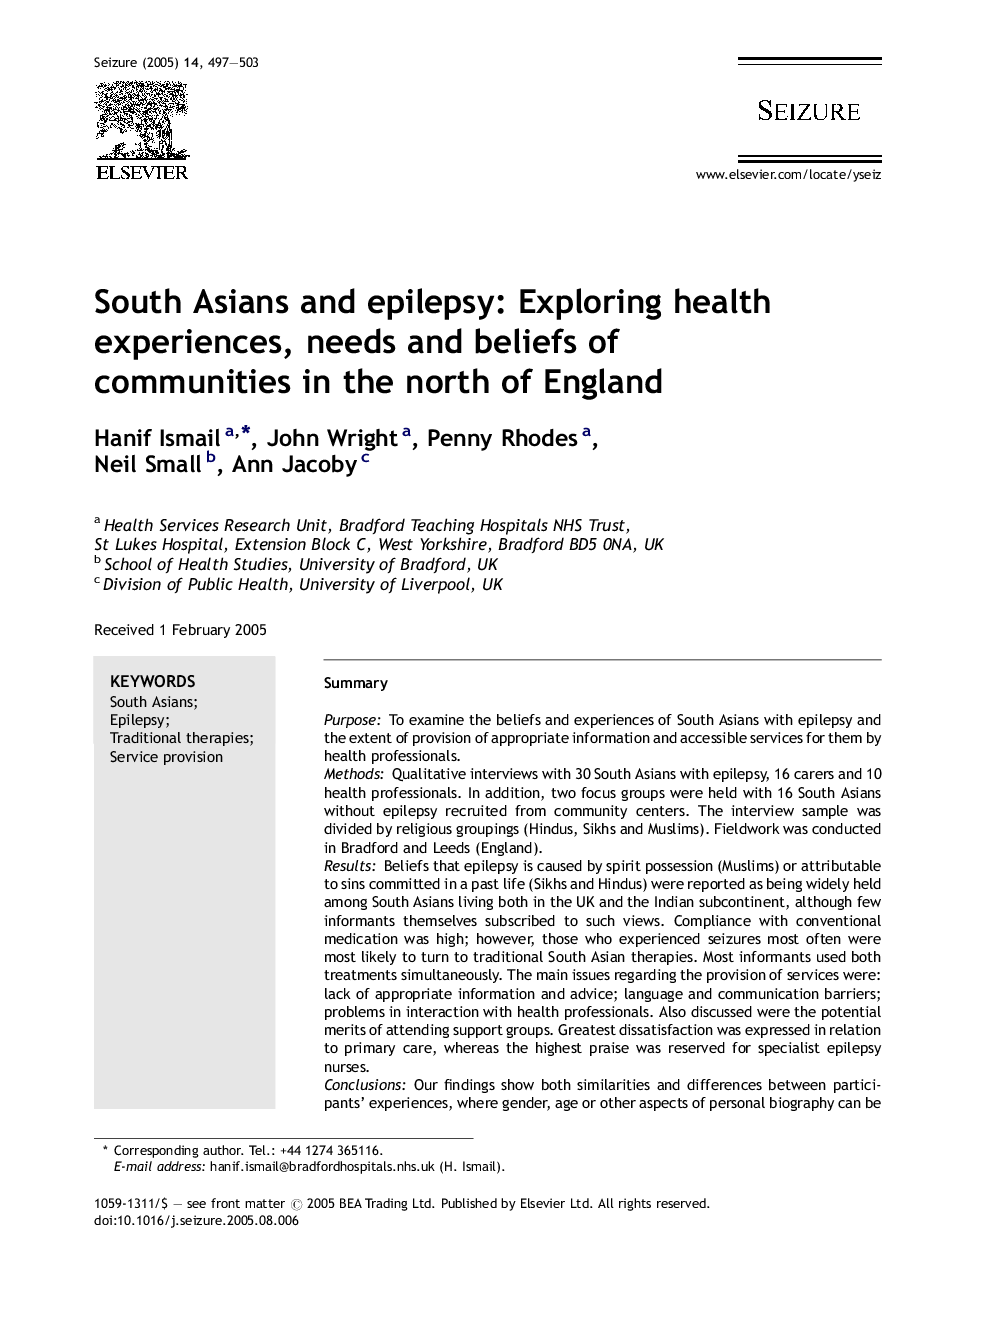 South Asians and epilepsy: Exploring health experiences, needs and beliefs of communities in the north of England